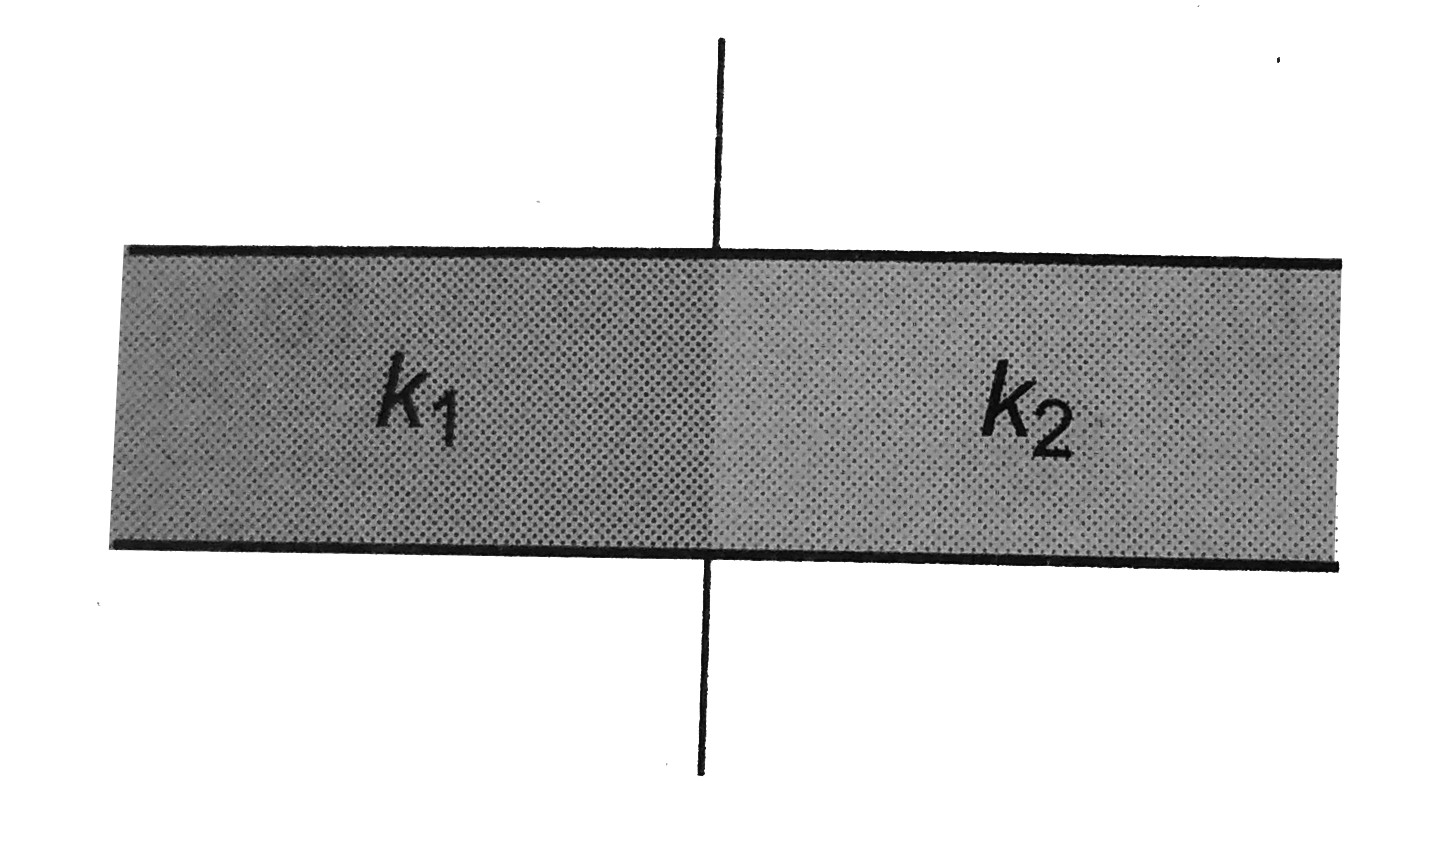 A parallel plate capacitor with air as medium between the plates has a capacitance of 10 muF. The area of capacitor is divided into two equal halves and filled with two media as shown in the figure having dielectric constant k(1) = 2 and k(2) = 4. the capacitance of the system will now be